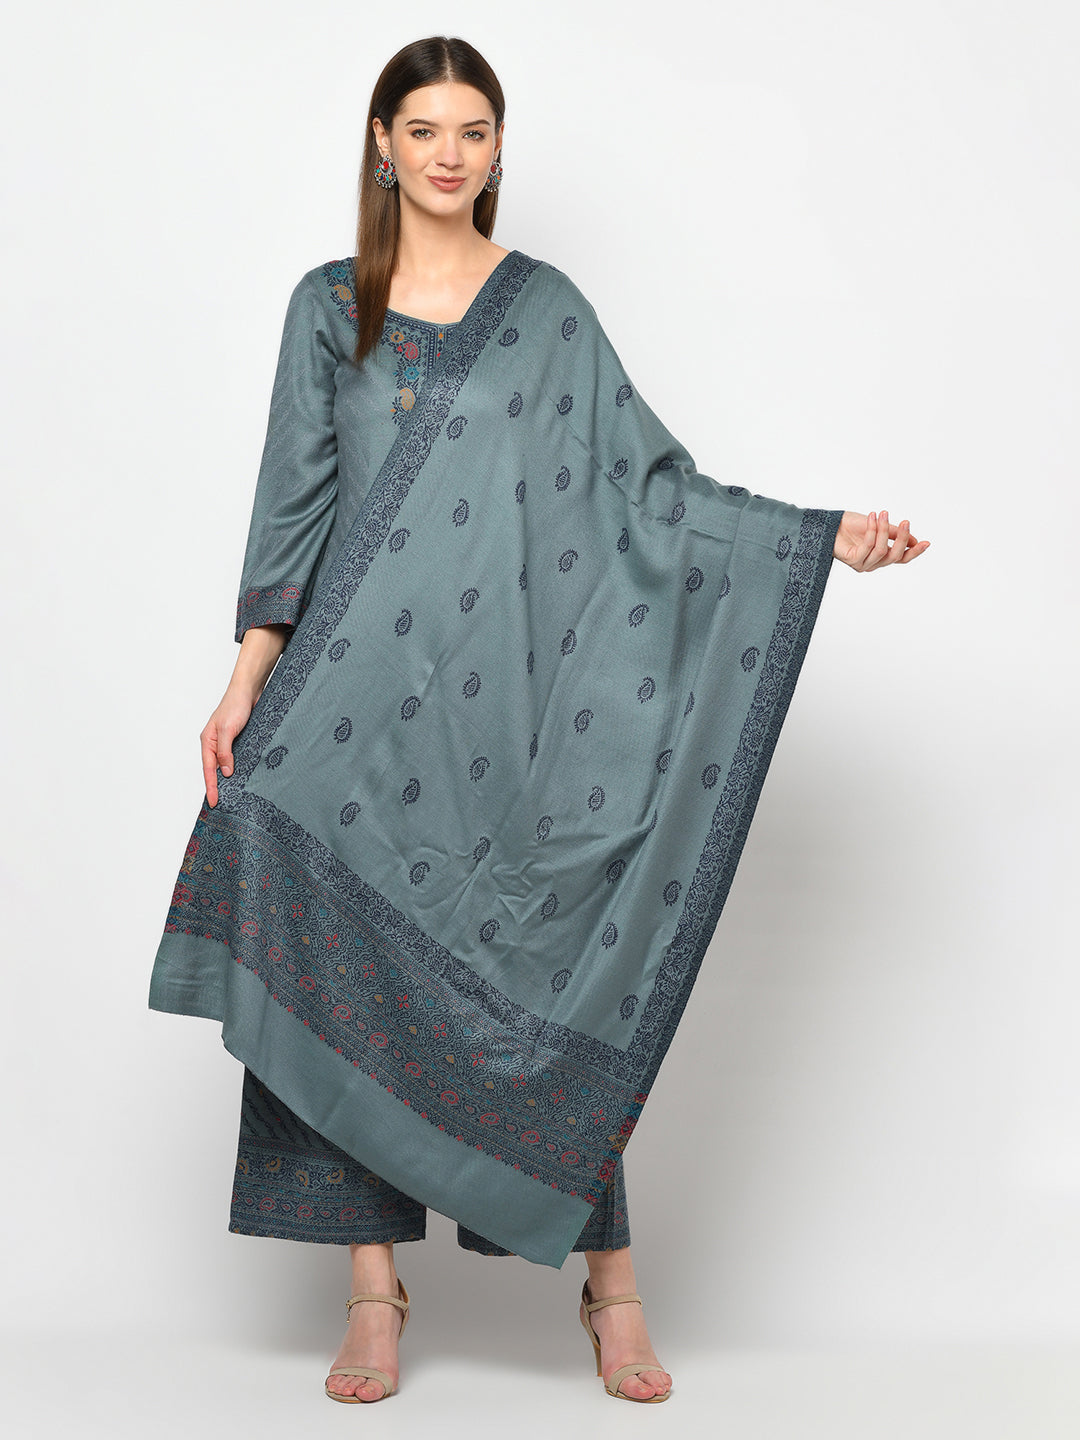 Acro Wool Grey Dress Material with Stole